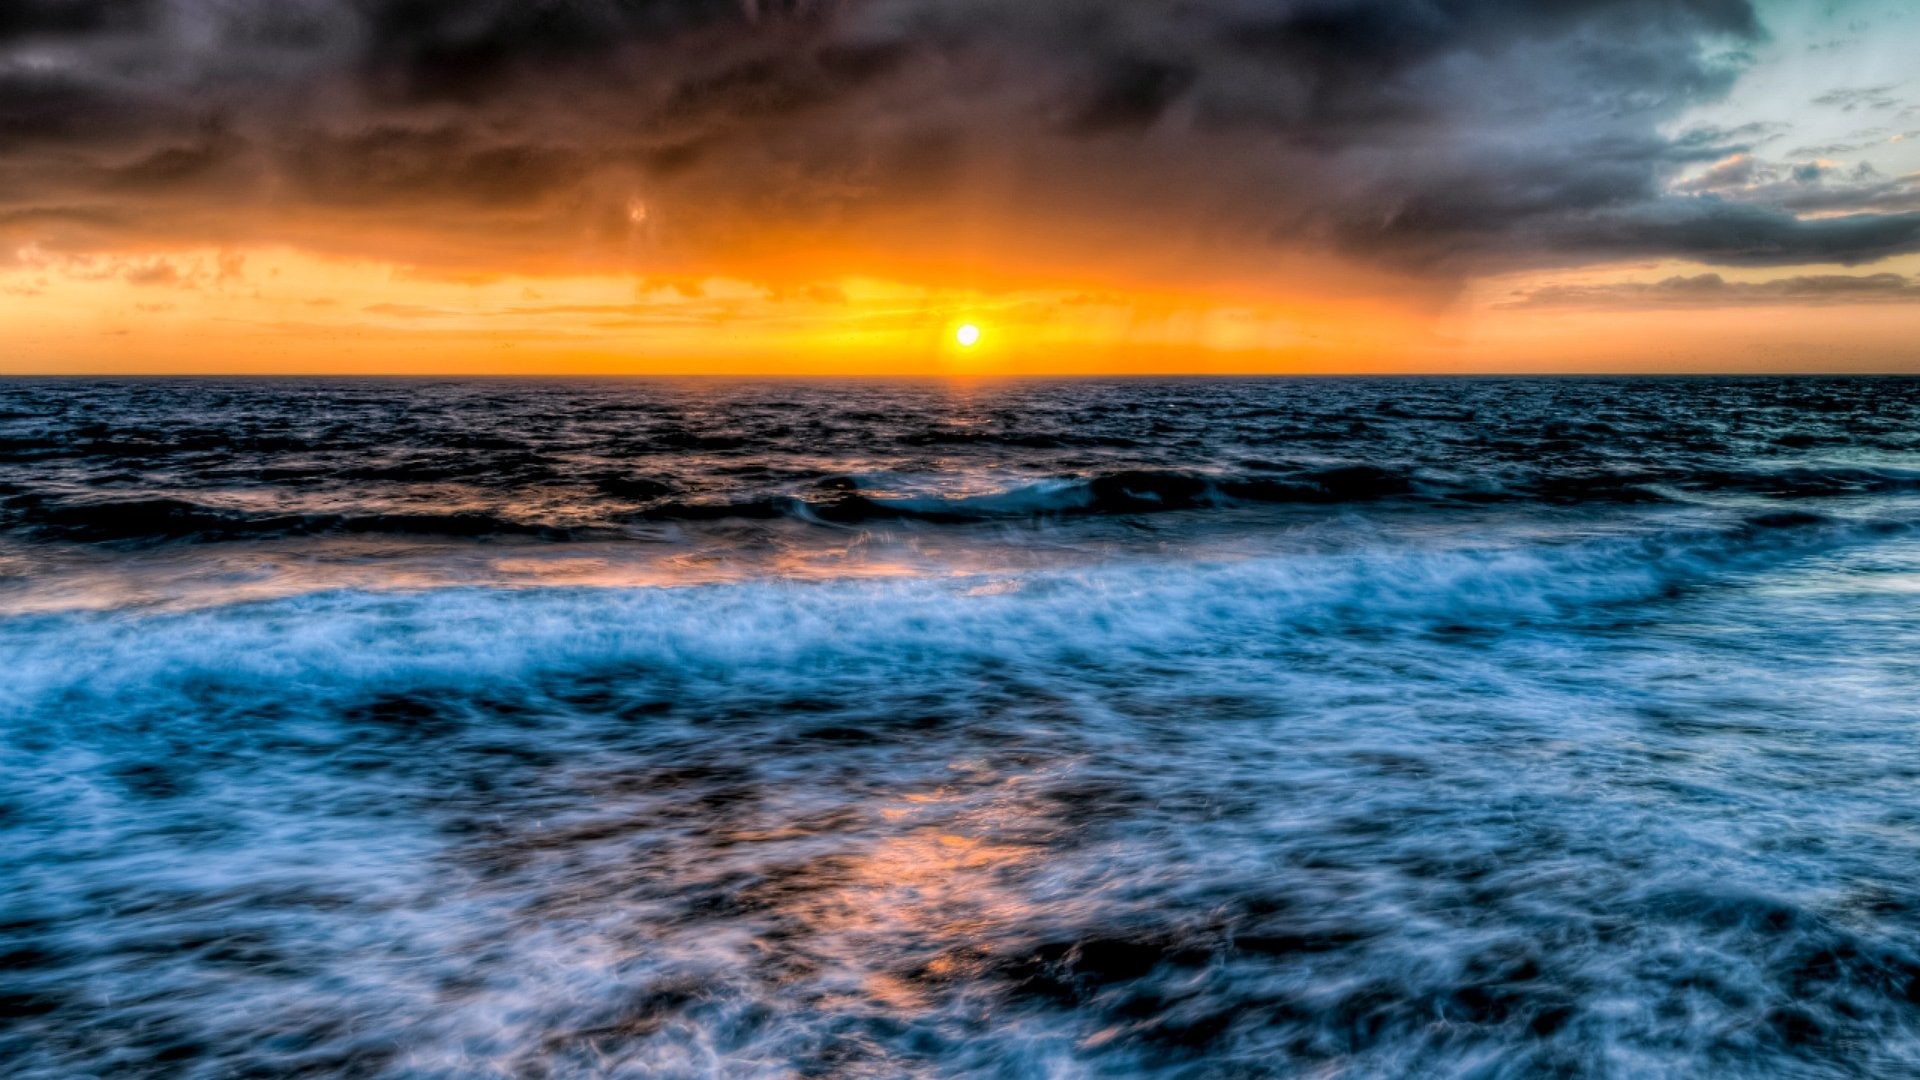 1920x1080 Stormy Skies Sunset Ocean Waves Reflection 1080p Wallpaper - 1920x1200